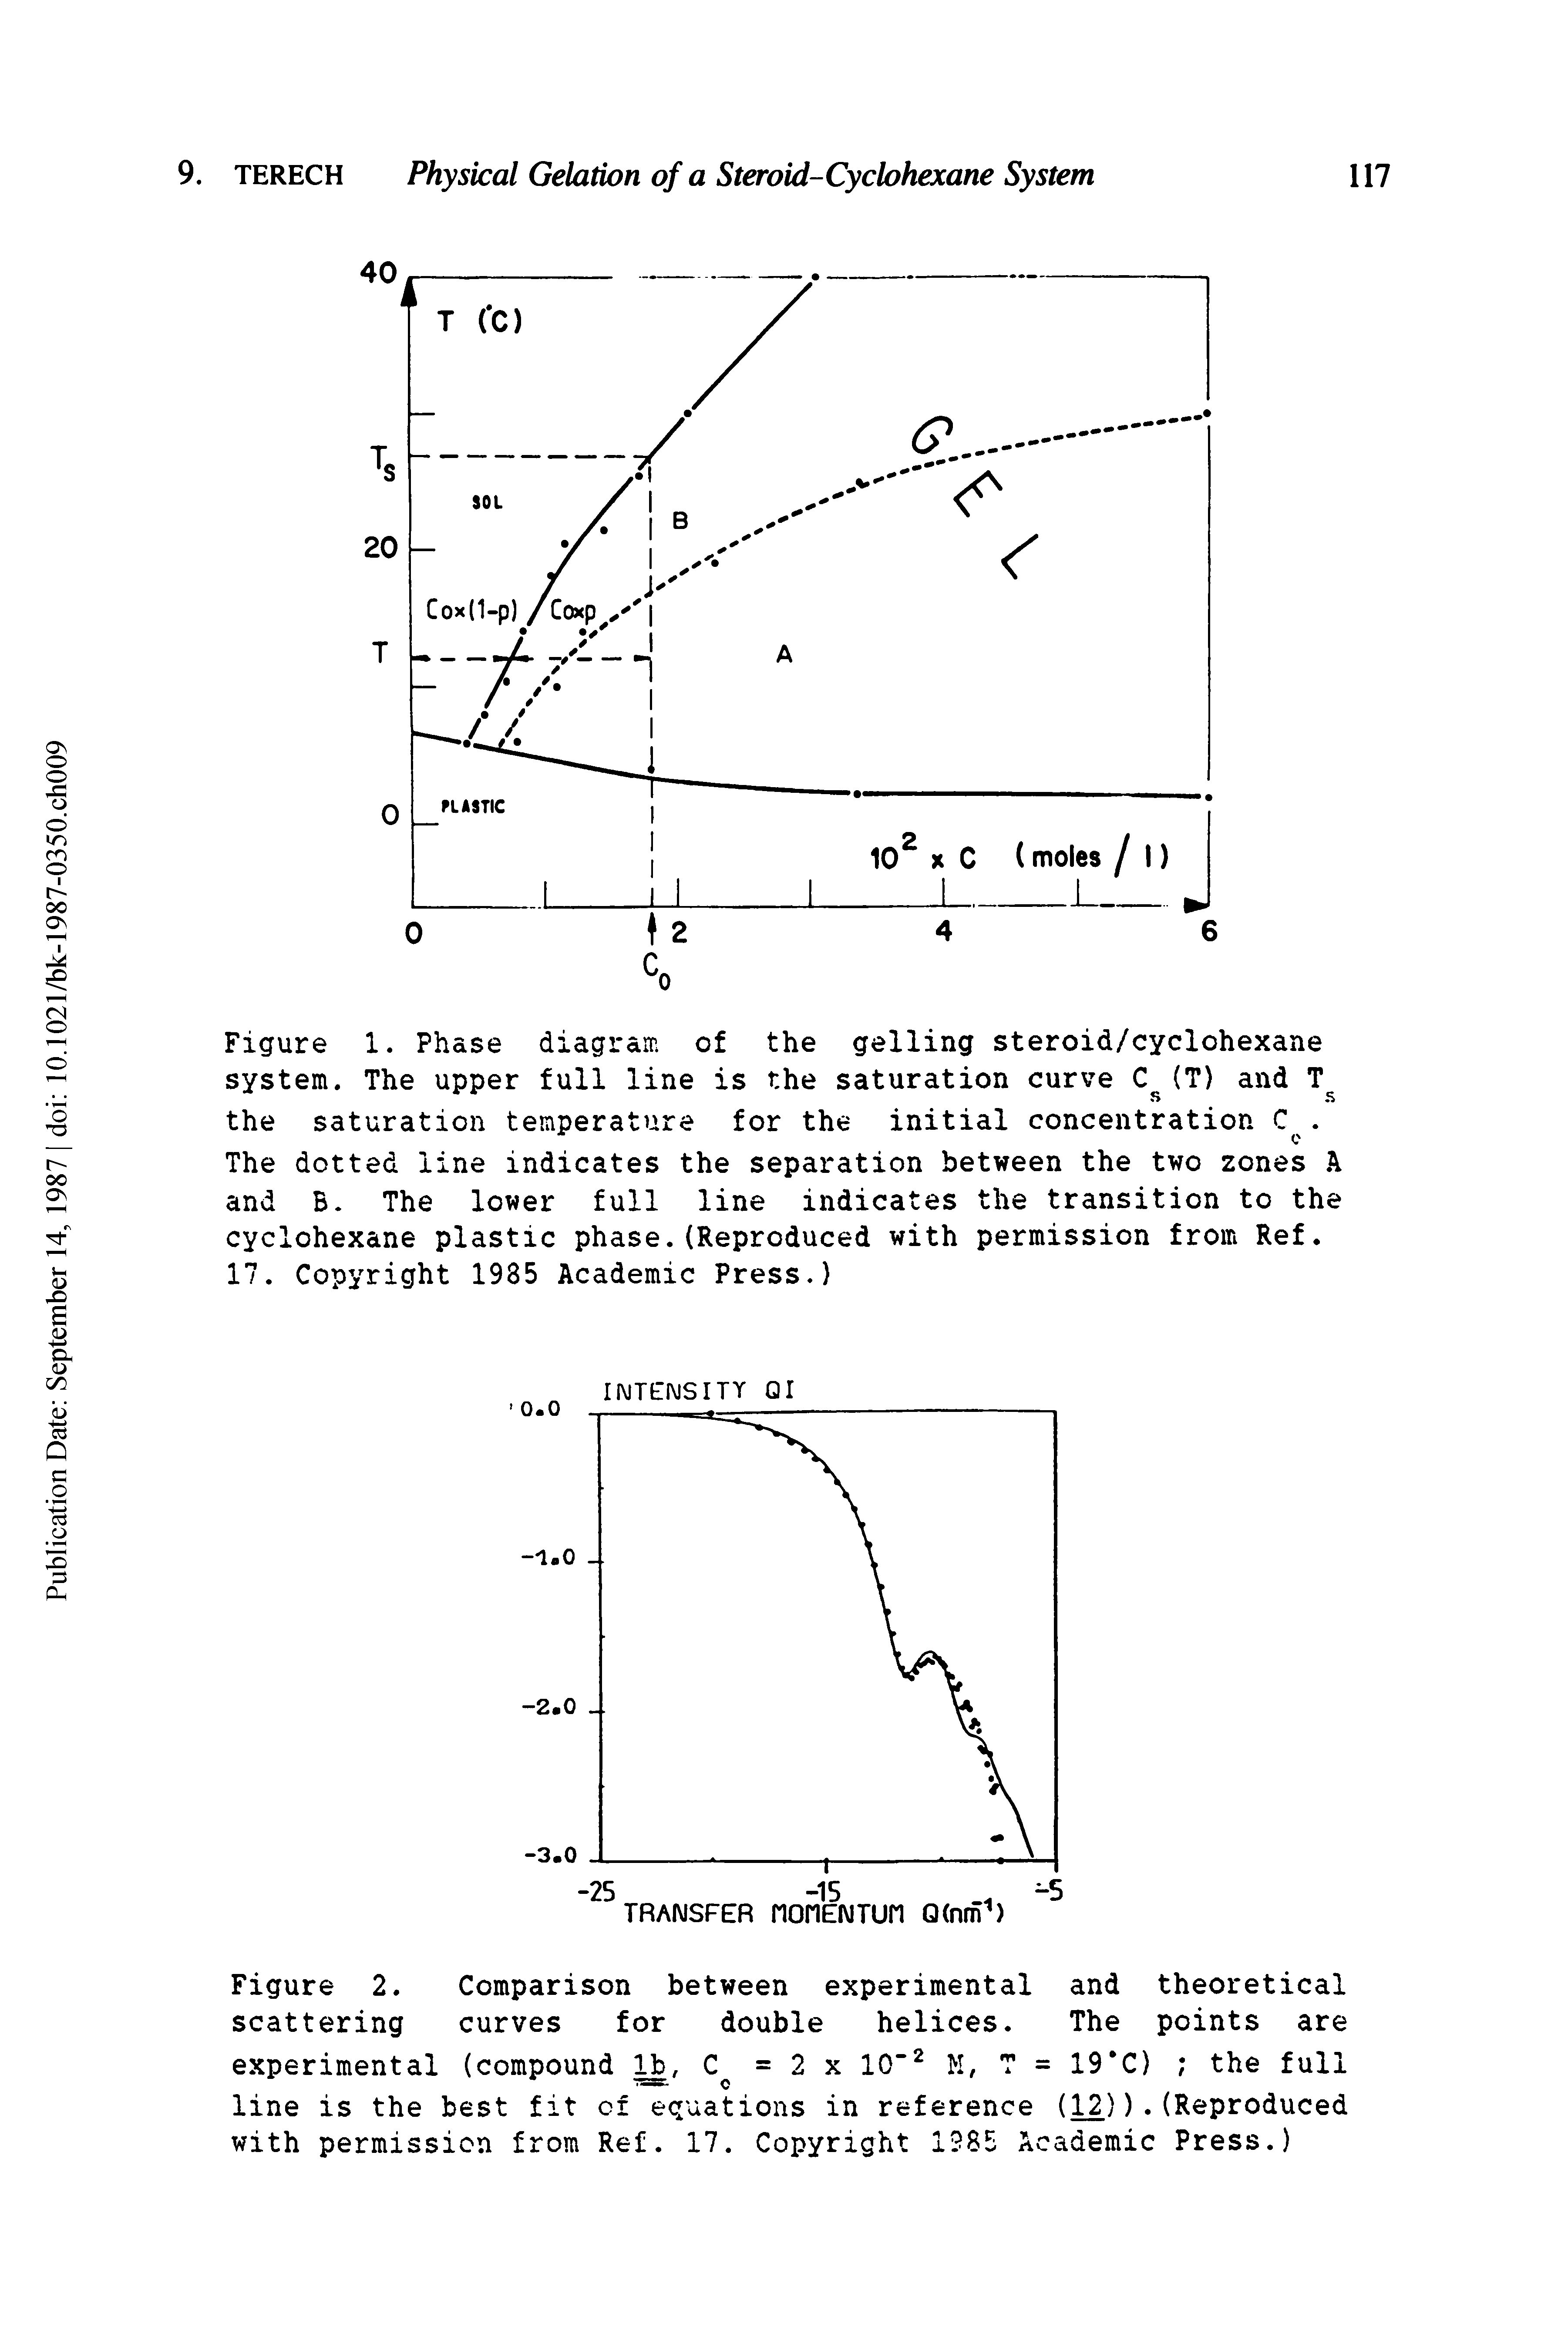 Figure 1. Phase diagram of the gelling steroid/cyclohexane system. The upper full line is the saturation curve (T) and the saturation temperature for the initial concentration. The dotted line indicates the separation between the two zones k and B. The lower full line indicates the transition to the cyclohexane plastic phase.(Reproduced with permission from Ref. 17. Copyright 1985 Academic Press.)...